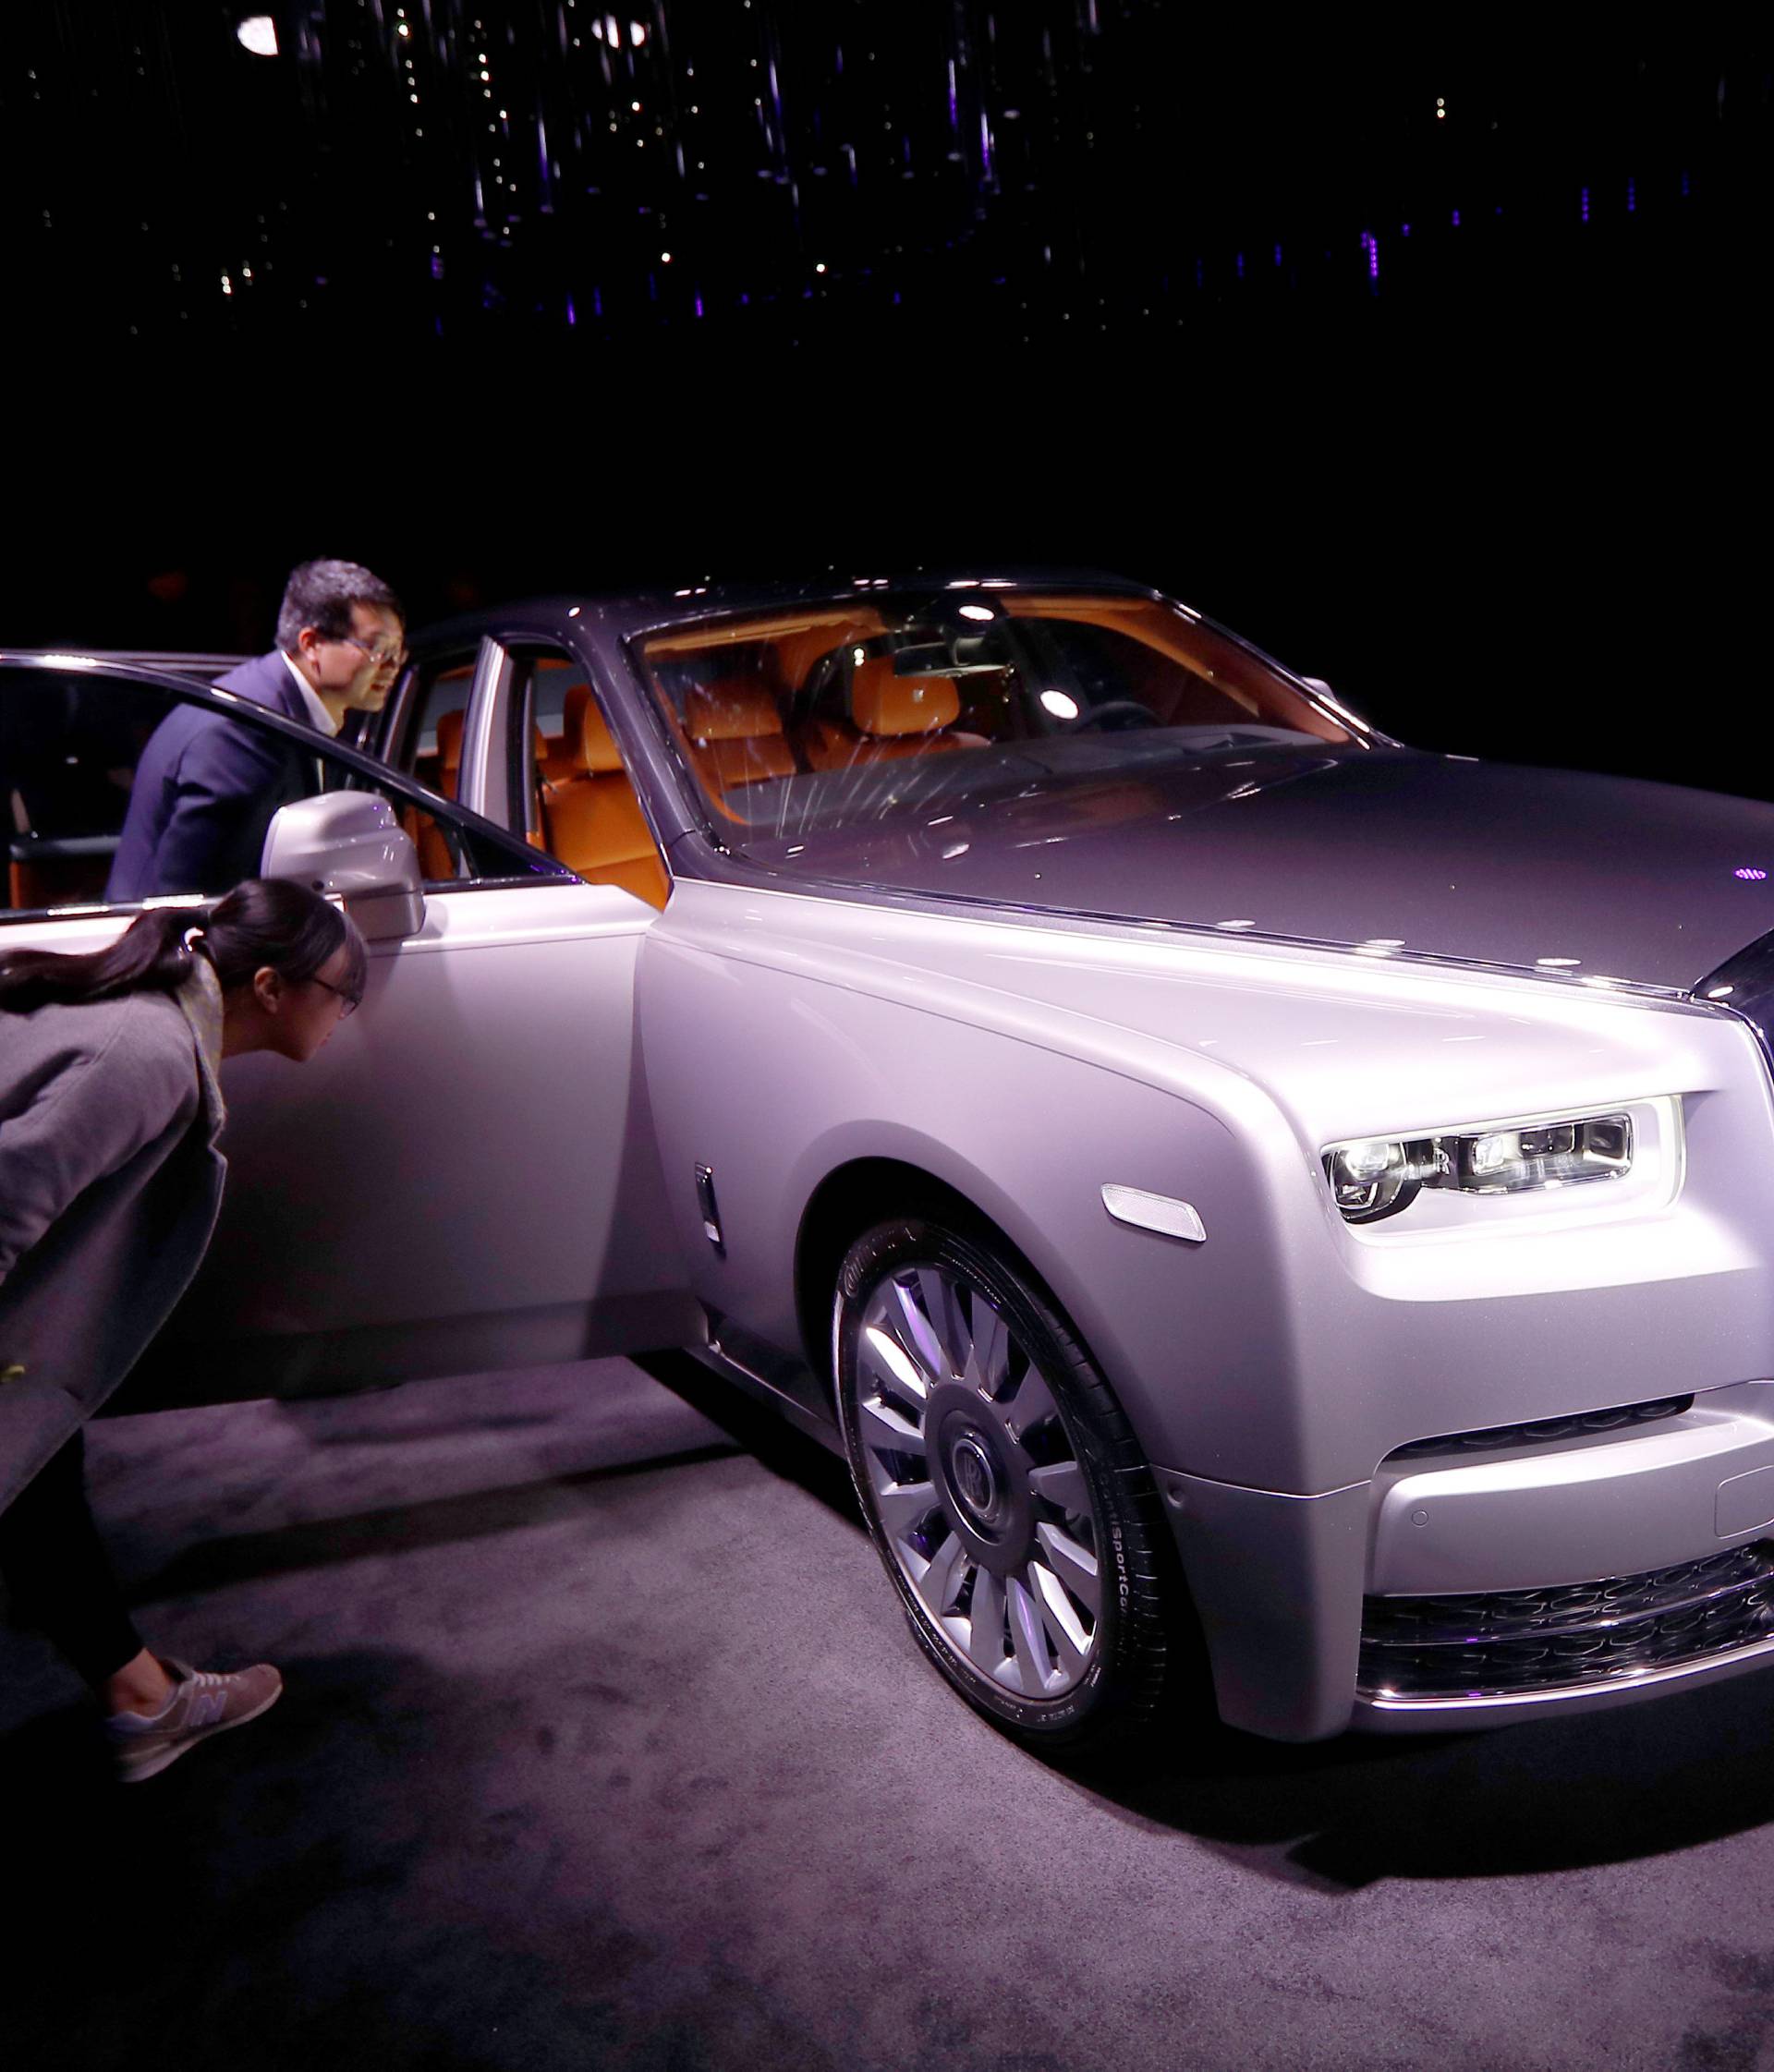 Invited guests view the new Rolls-Royce Phantom as it is premiered at an event at Bonhams, in London